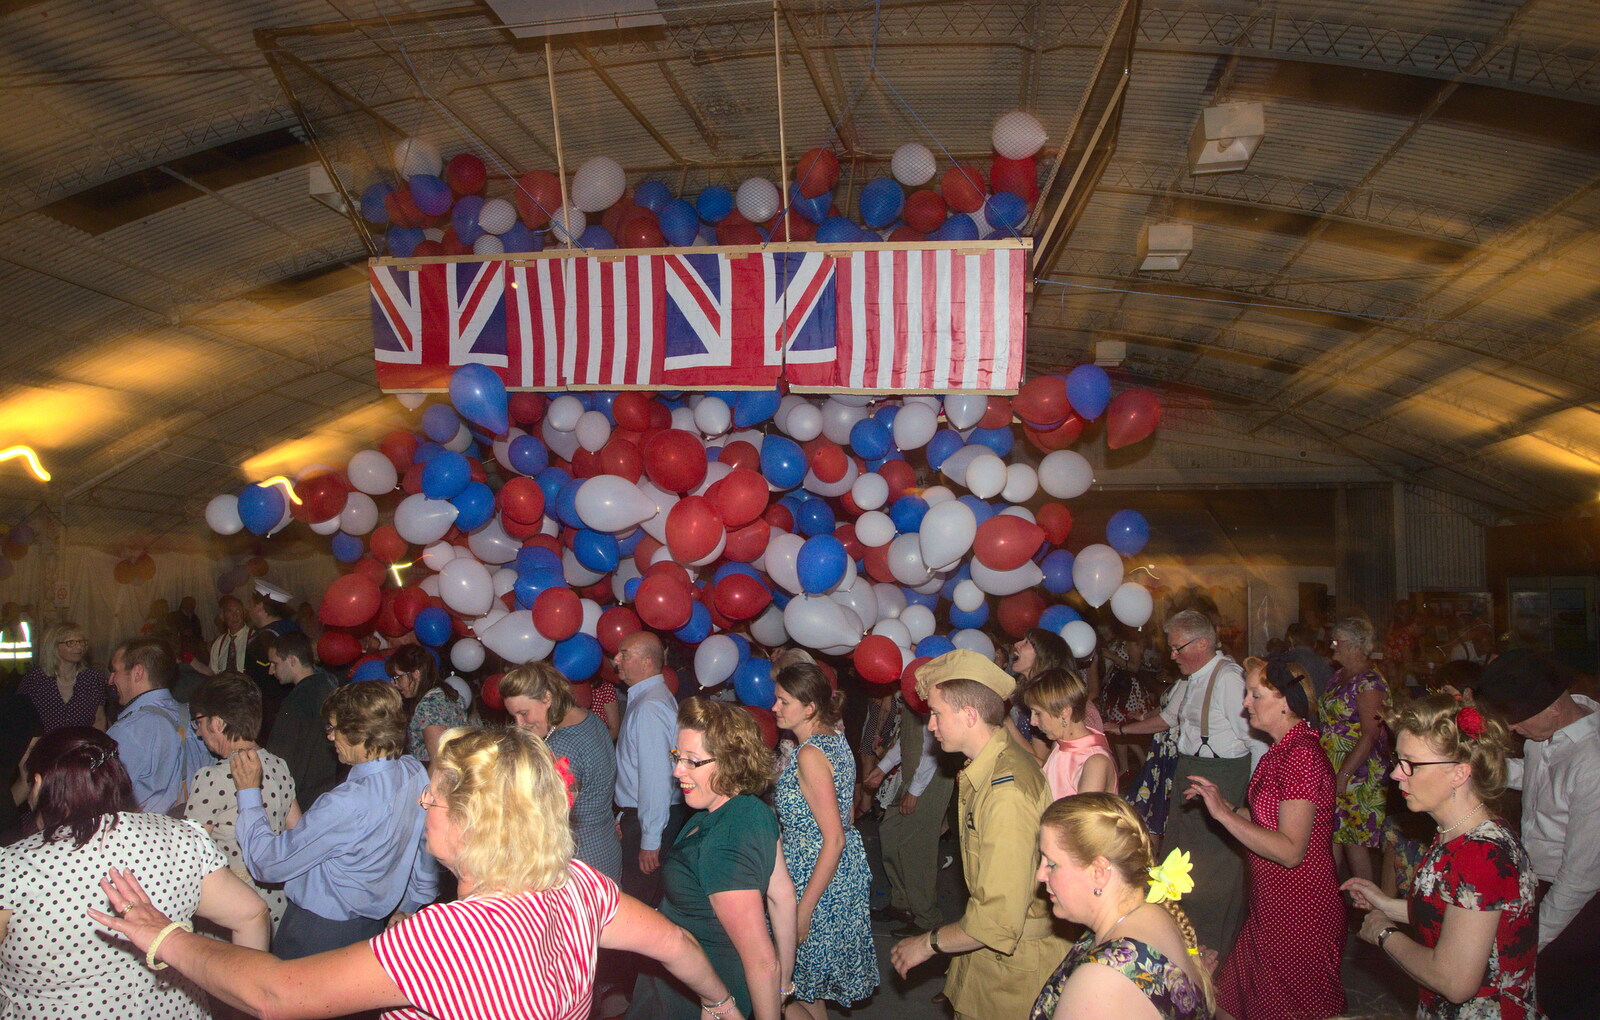 The balloons are unleashed from "Our Little Friends" Warbirds Hangar Dance, Hardwick, Norfolk - 9th July 2016